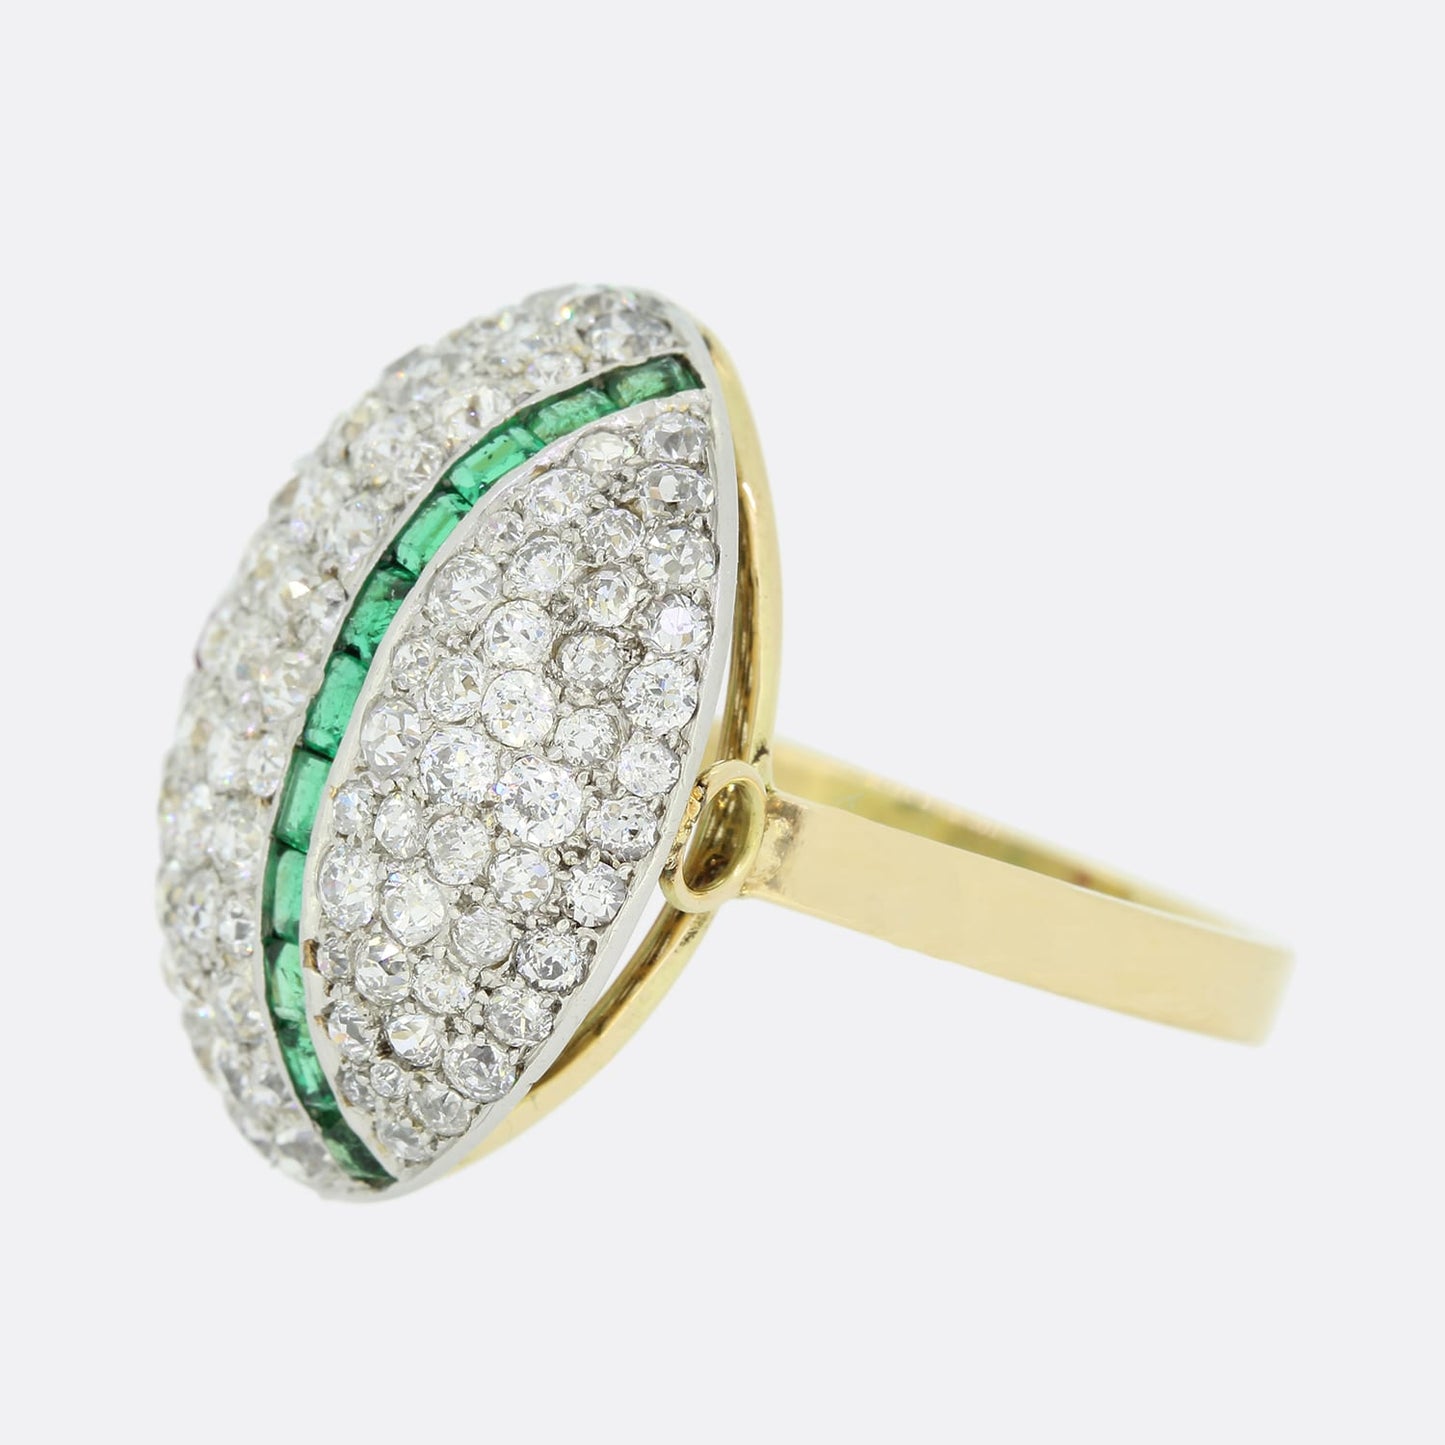 Ruby, Emerald and Diamond Cocktail Ring